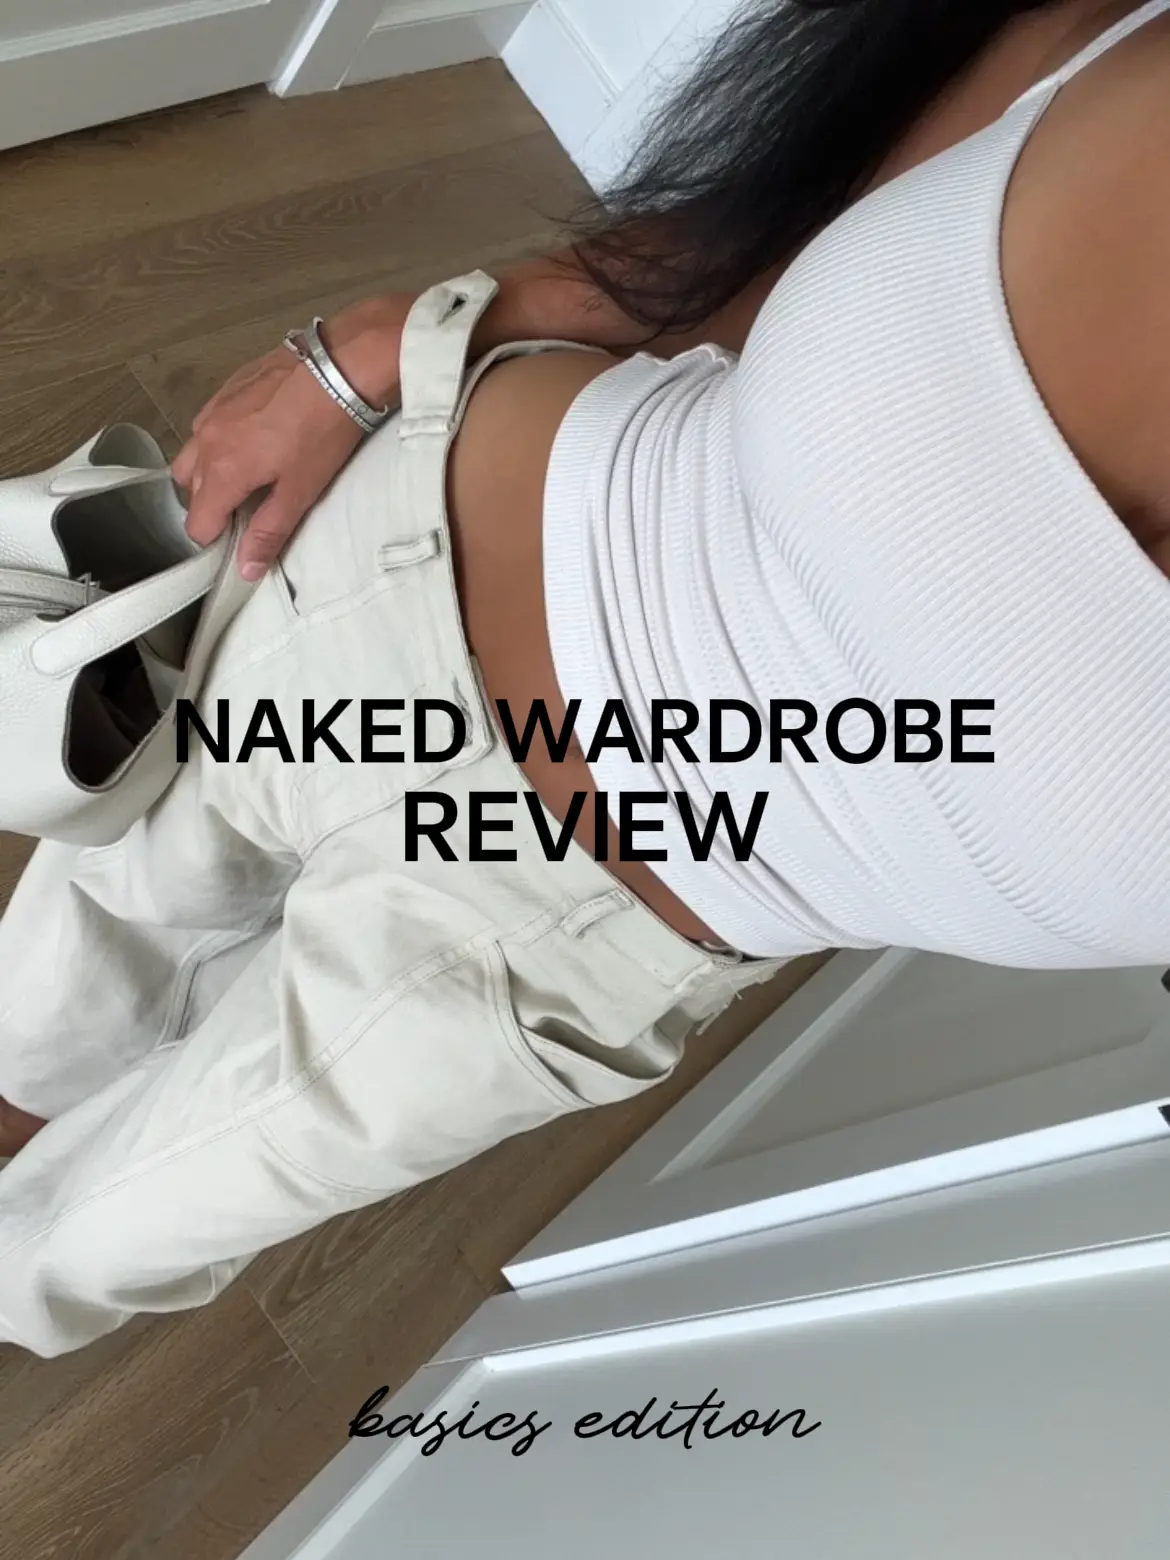 NAKED WARDROBE REVIEW, Gallery posted by THESPINA